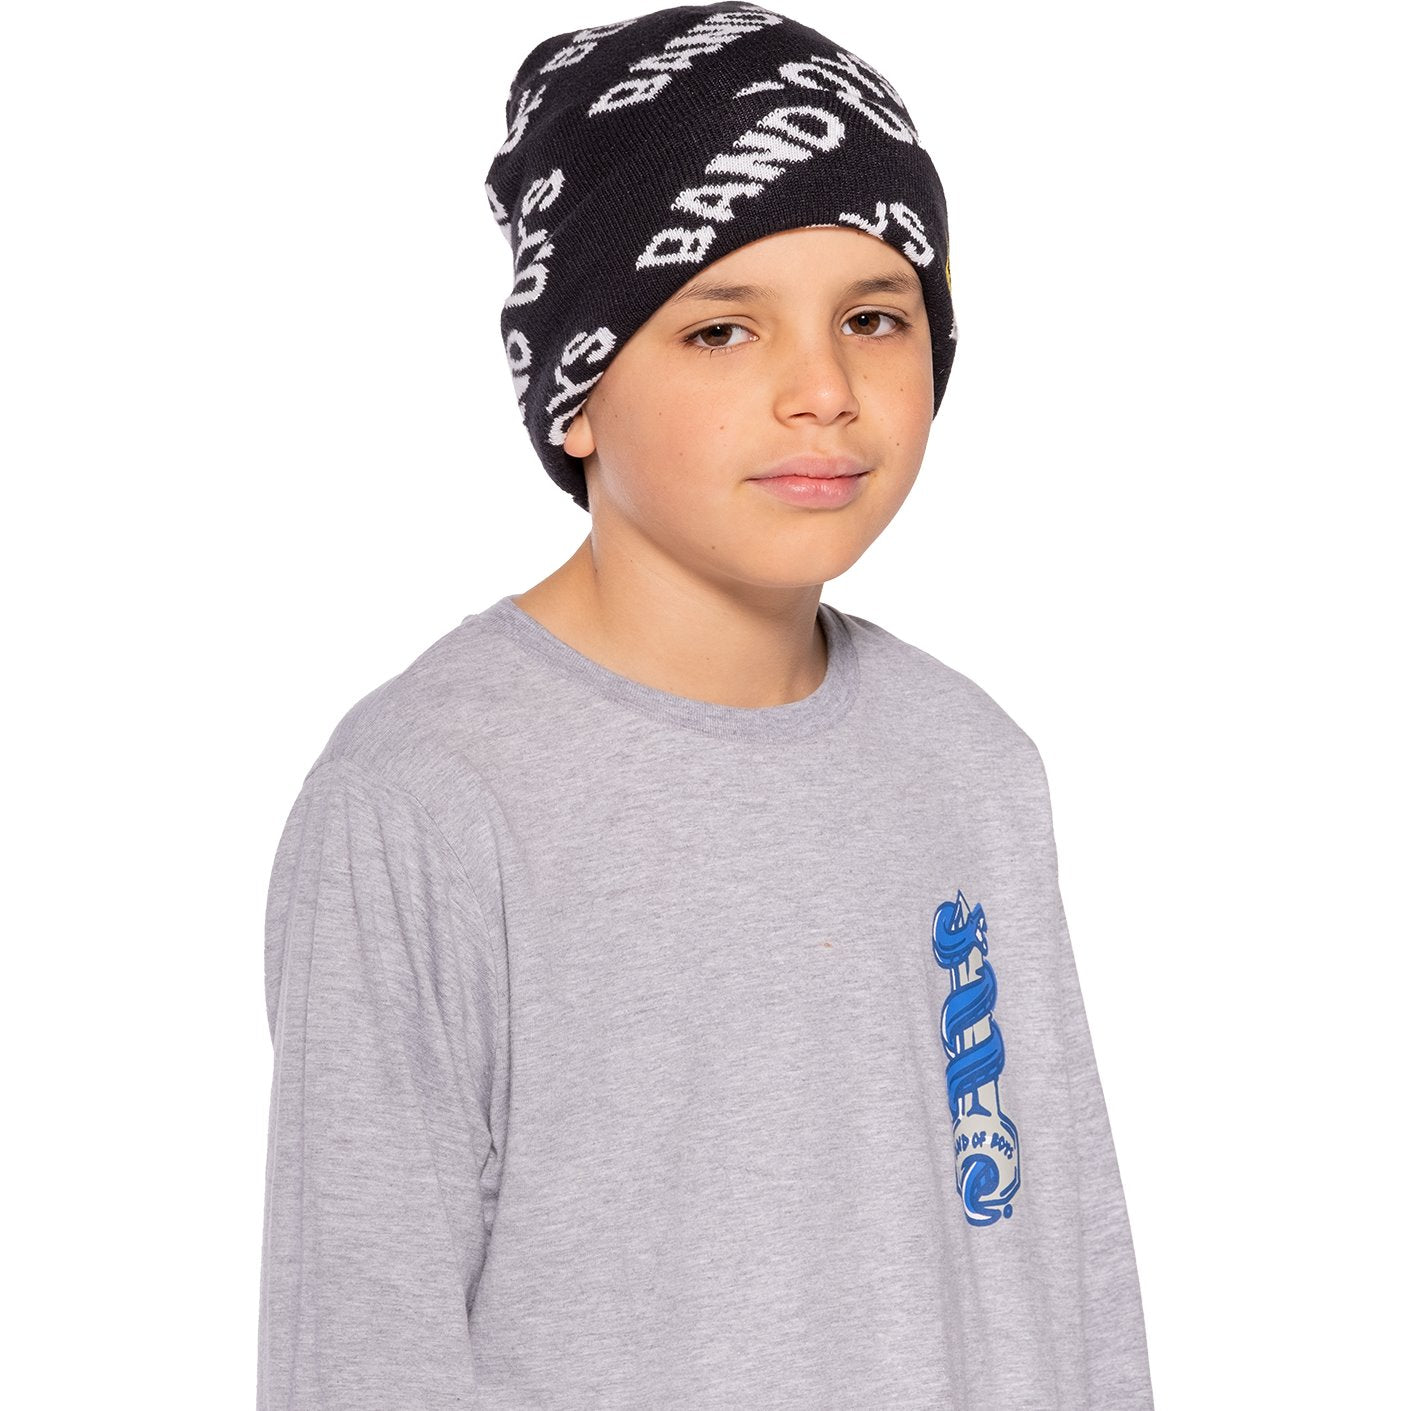 Band of Boys Repeat Knit Beanie